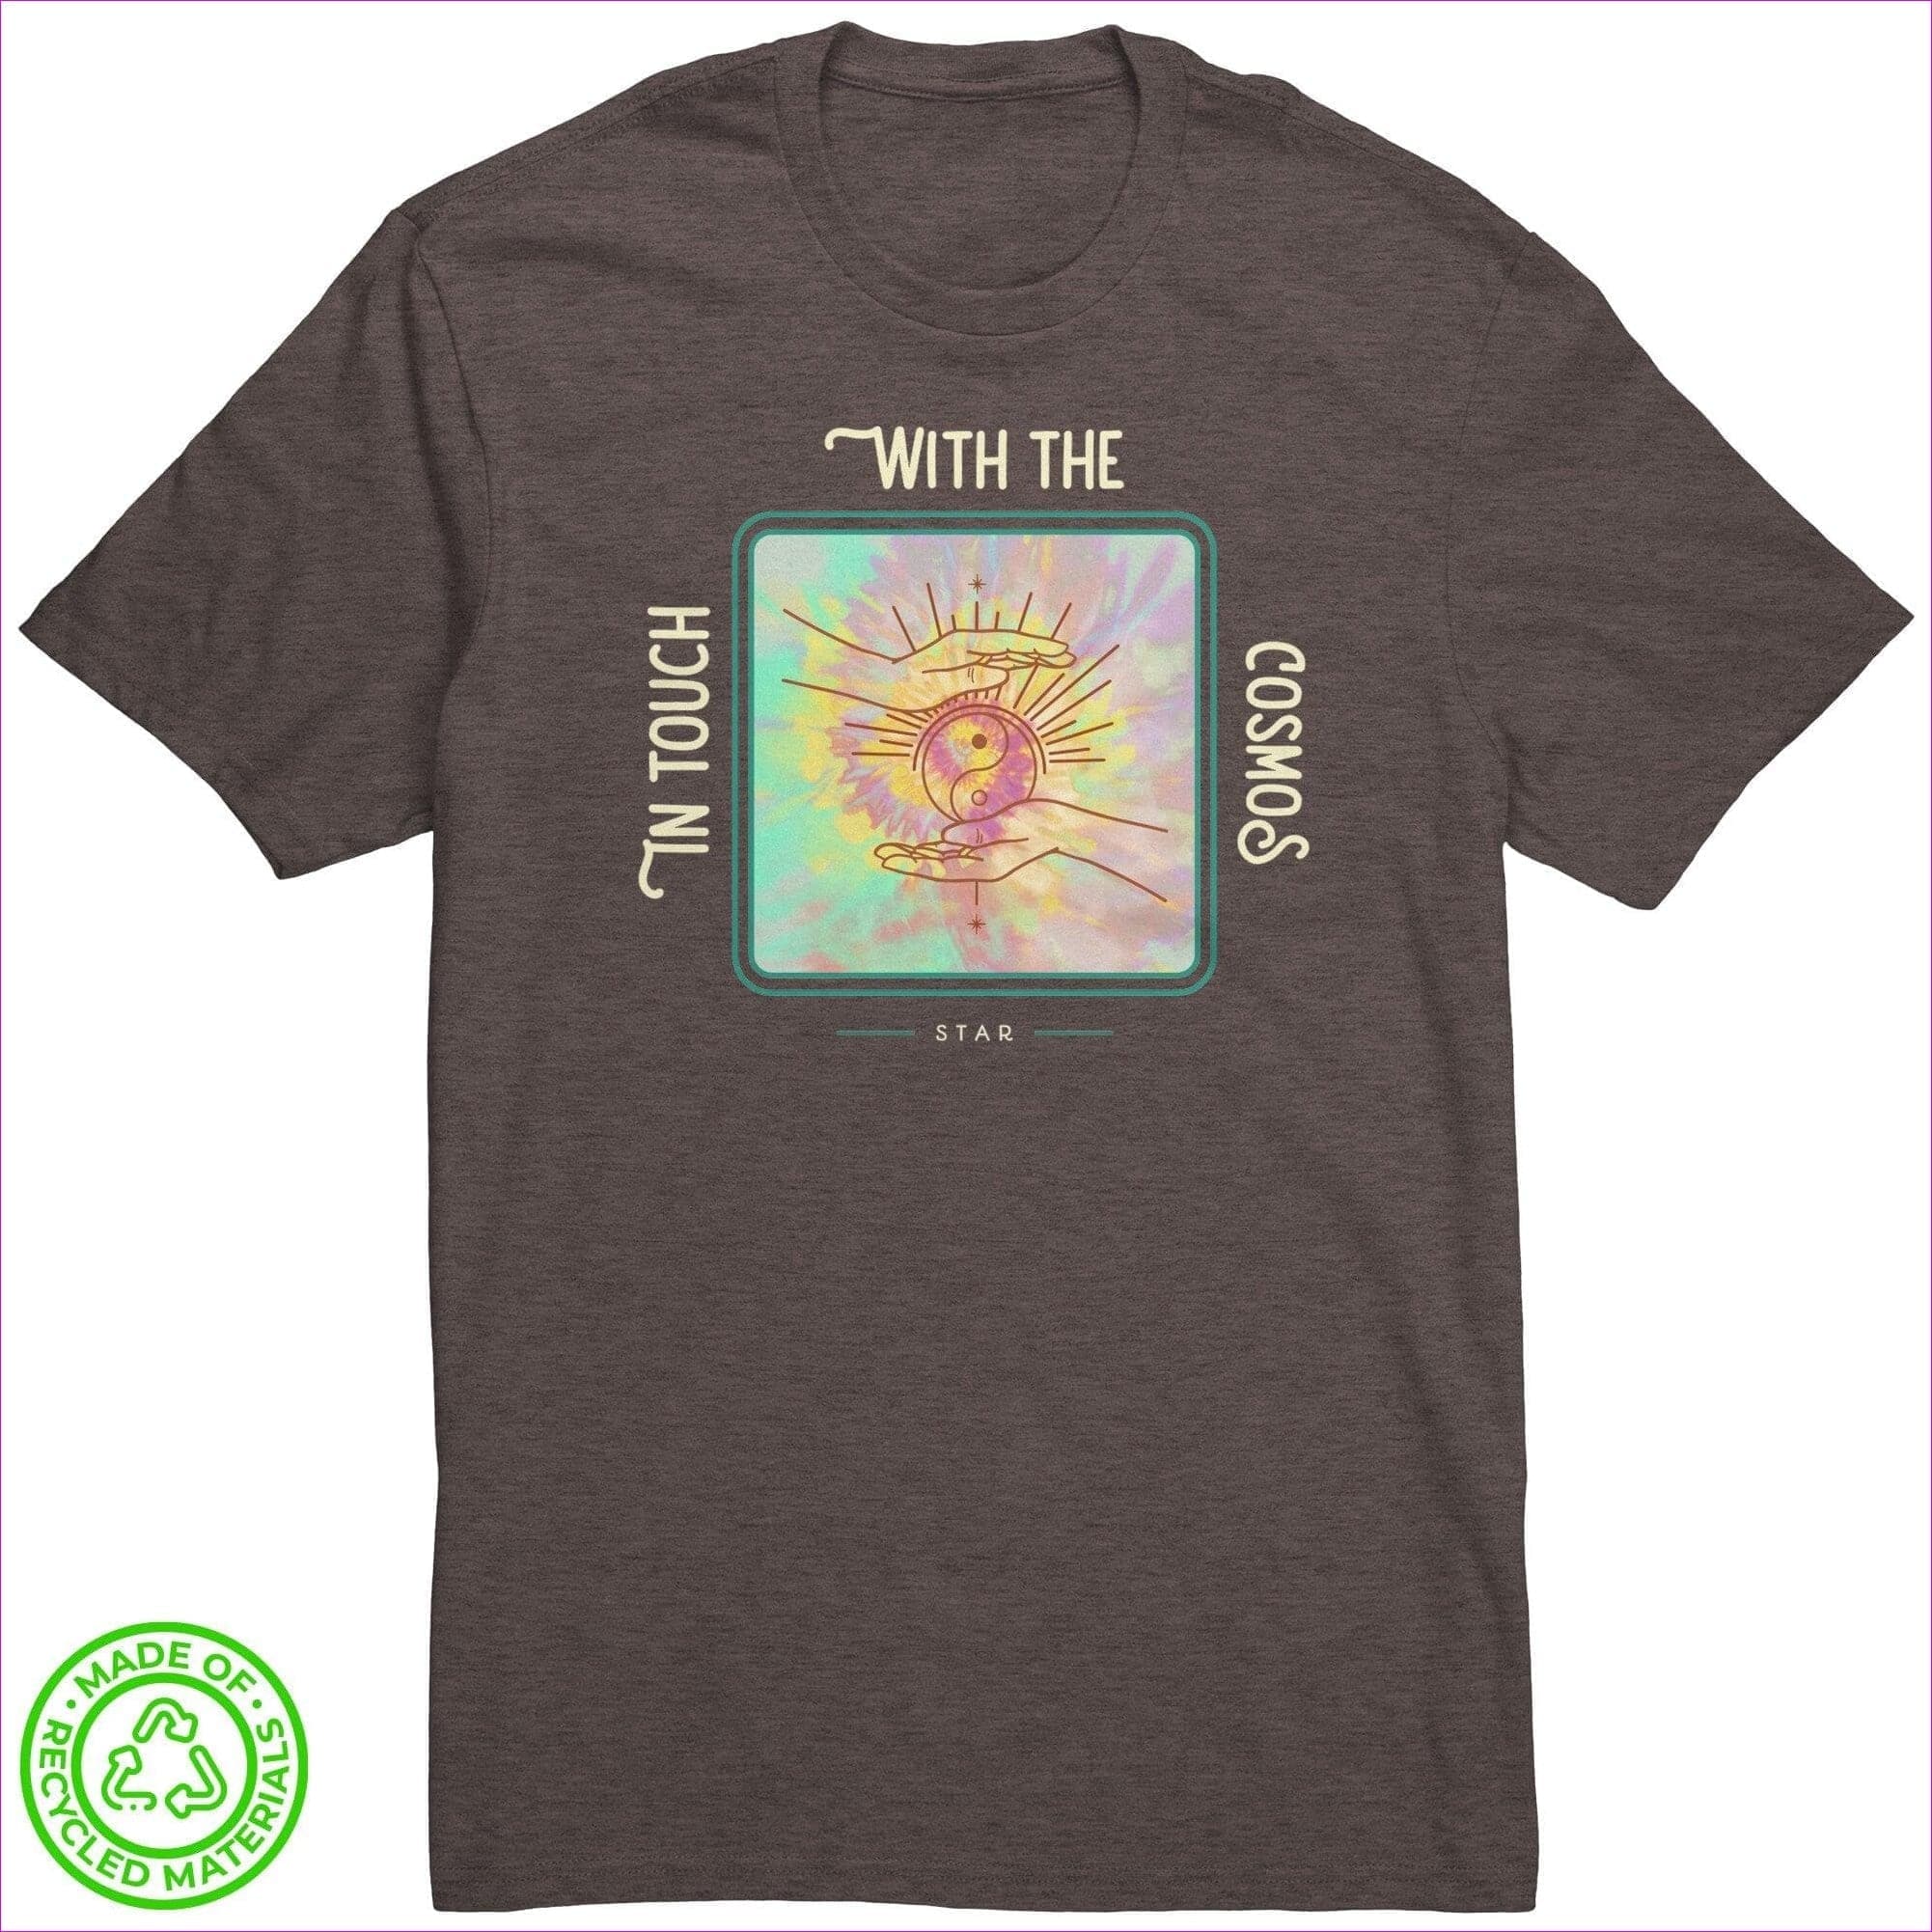 Deep Brown Heather In Touch Recycled Fabric Unisex Tee - Unisex T-Shirt at TFC&H Co.